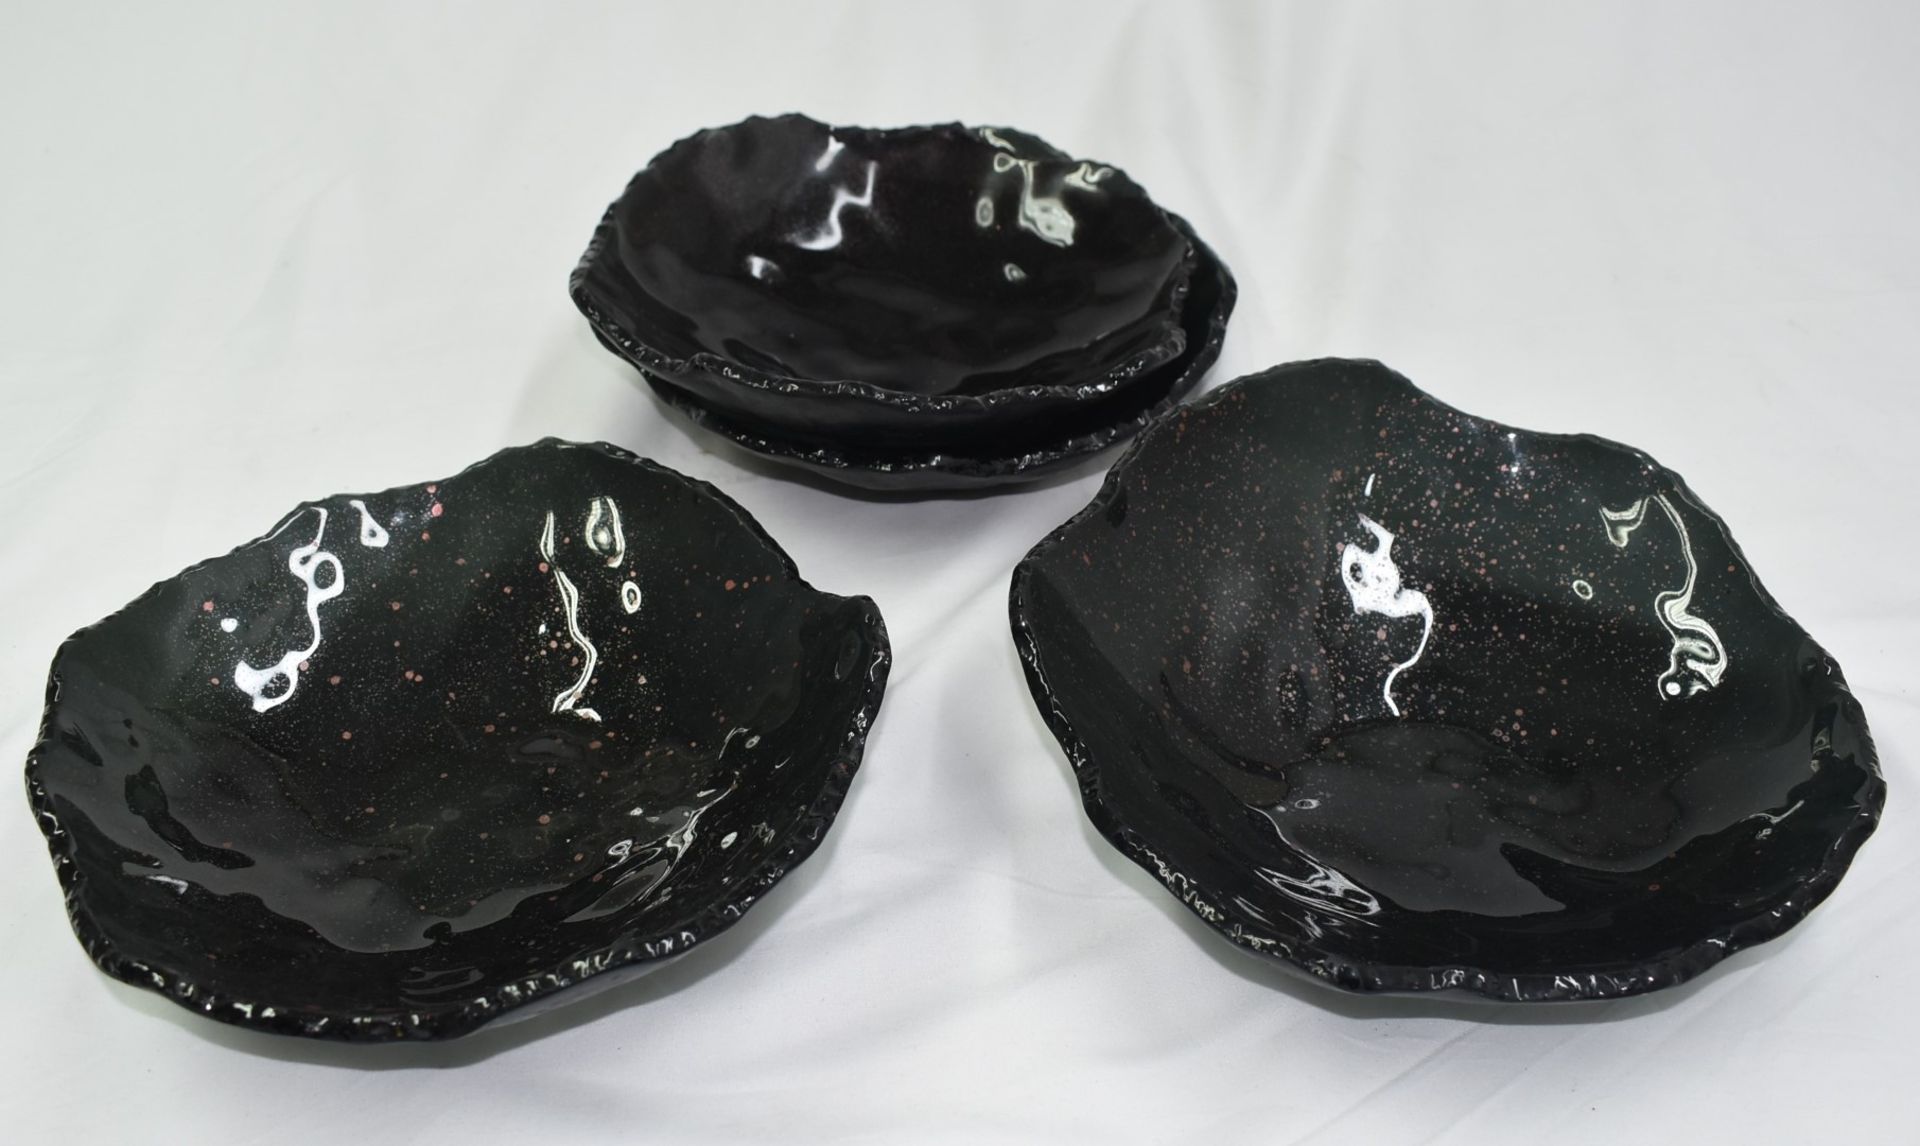 4 x Pordamsa Craft Glass Cosmos Dinner Bowls - Handcrafted Unique Dinnerware - Inspired by the Magic - Image 5 of 11